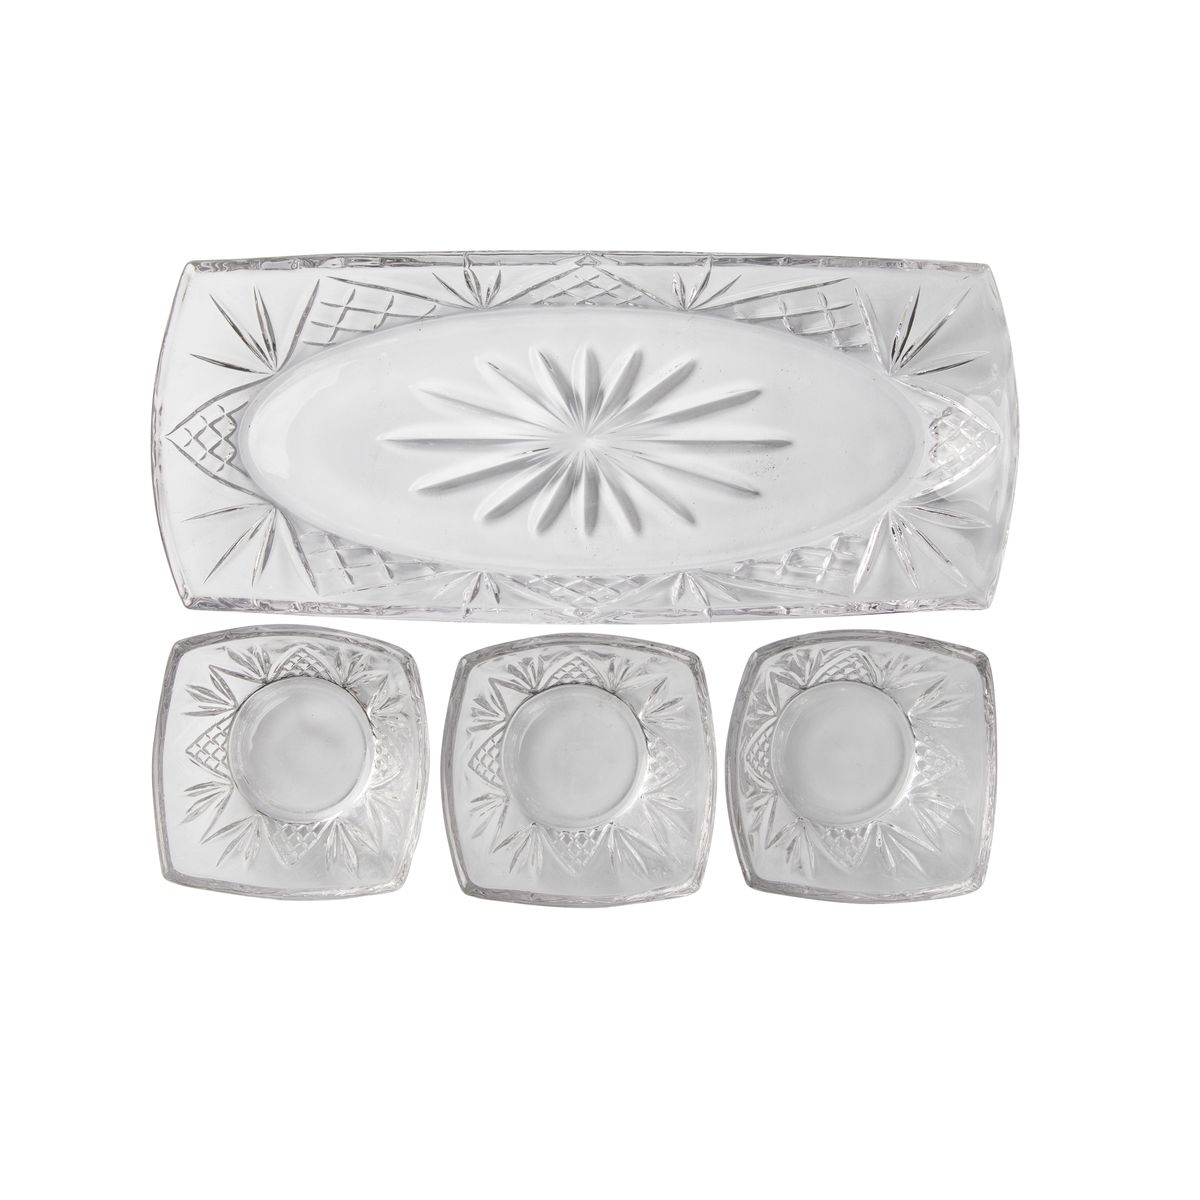 Paris Tray with 3 Small Bowls